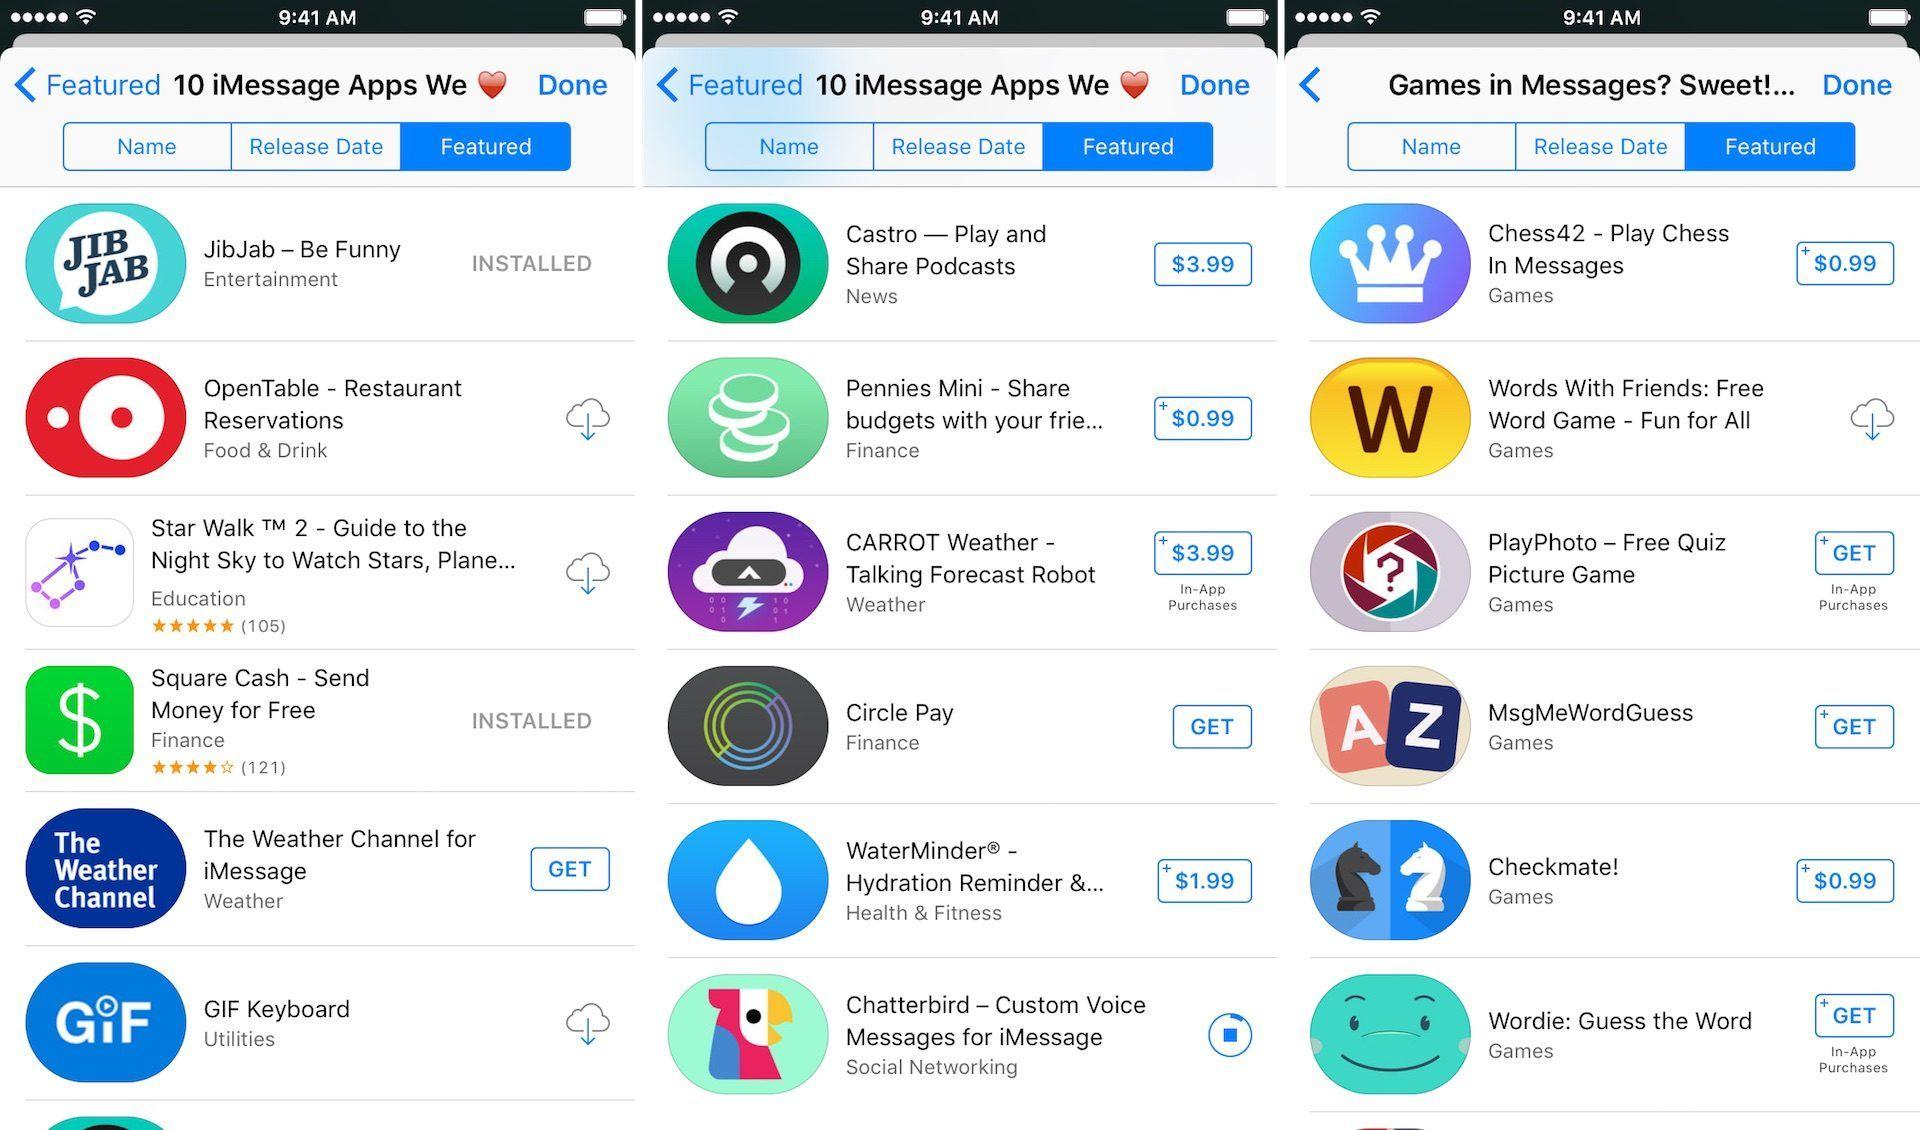 iPad App Store Logo - Apple launches iMessage App Store with various iMessage apps, games